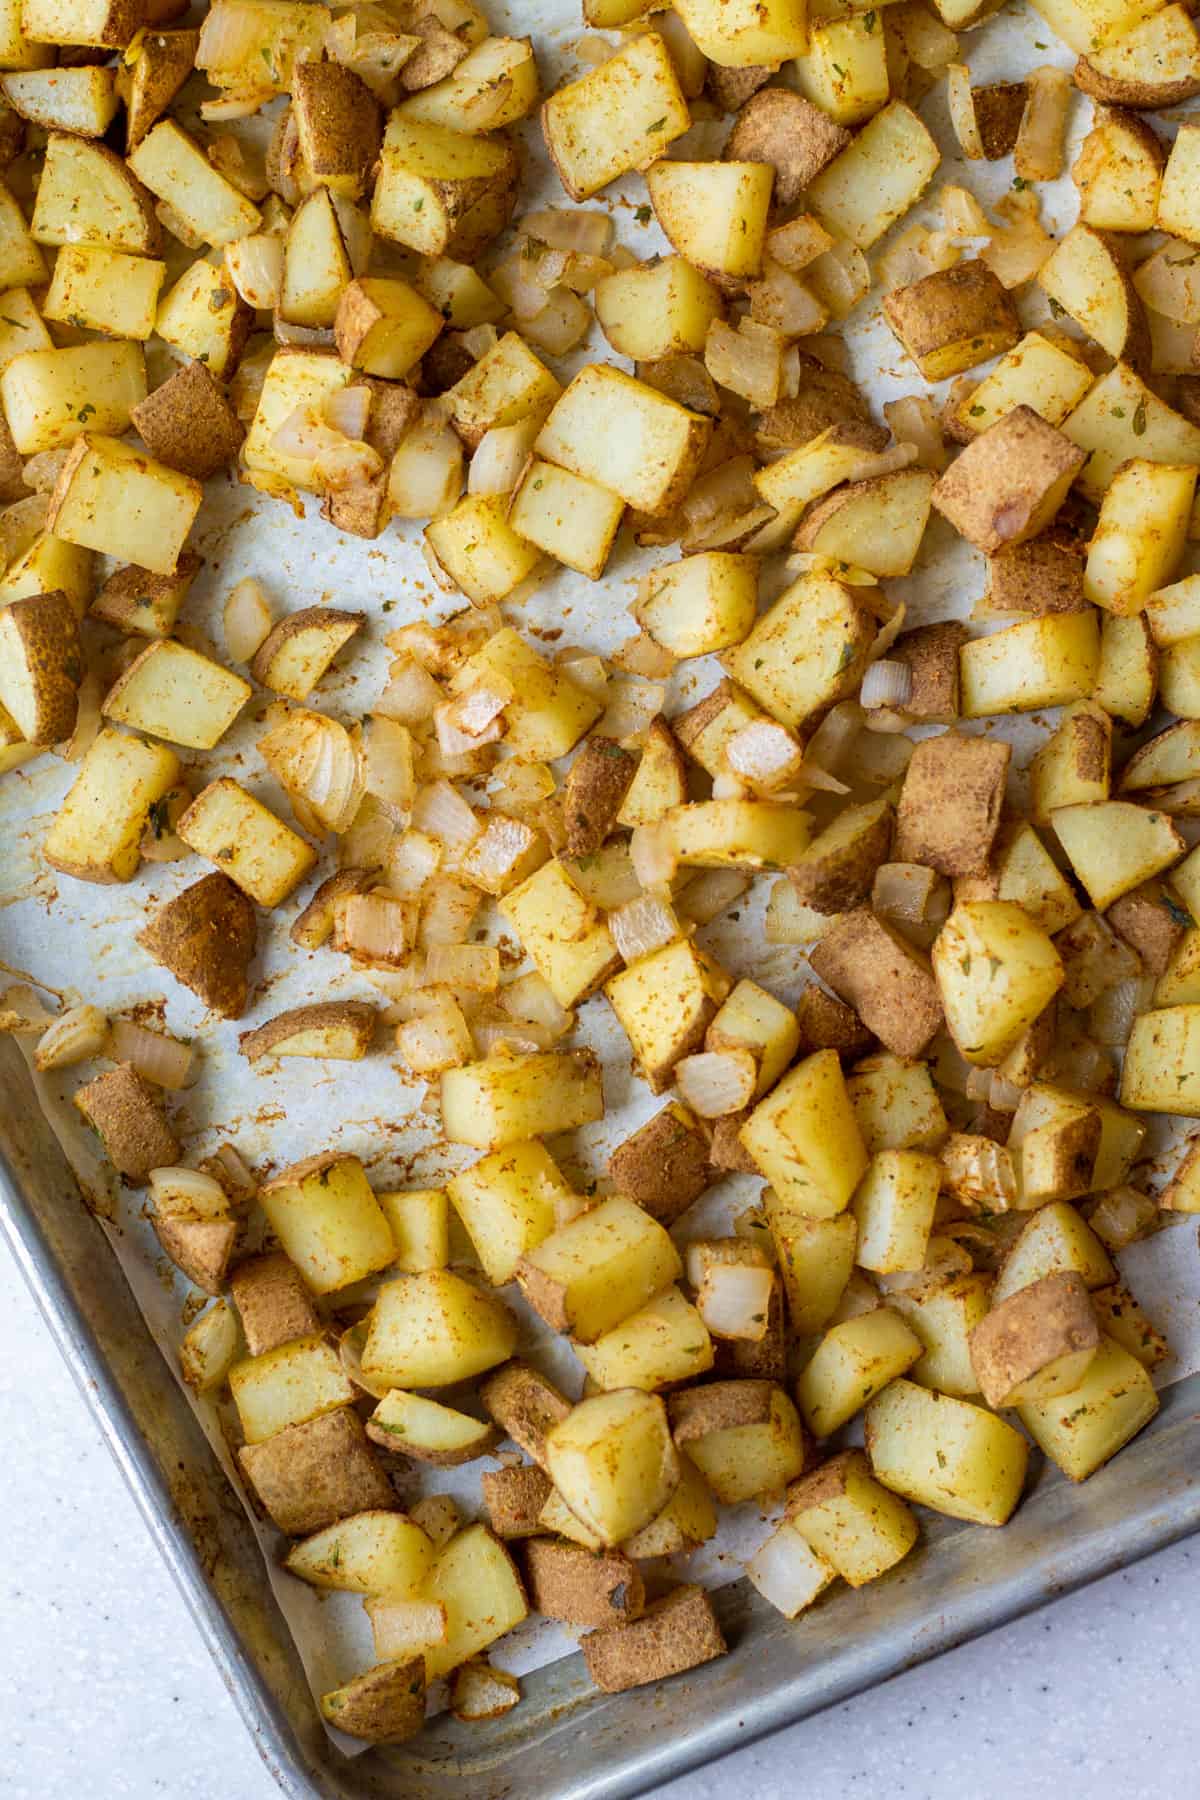 diced potato and onion after baking with spices on a parchment paper lined sheet pan